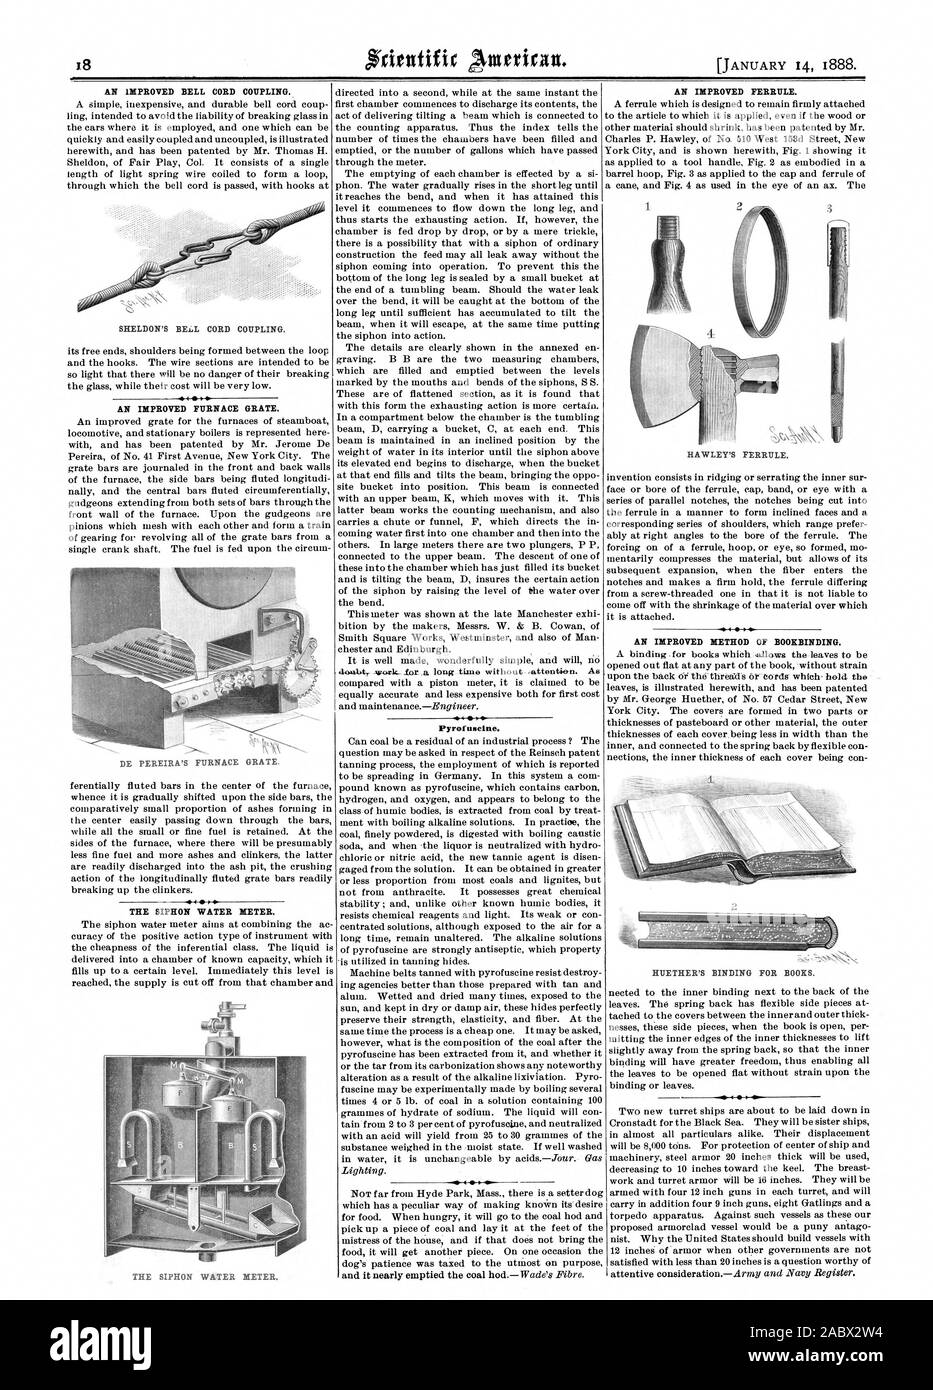 AN IMPROVED BELL CORD COUPLING. SHELDON'S BEA.L CORD COUPLING. 4  AN IMPROVED FURNACE GRATE. THE SIPHON WATER DIETER. Pyrofuscine. AN IMPROVED FERRULE. AN IMPROVED METHOD OF BOOKBINDING., scientific american, 1888-01-14 Stock Photo